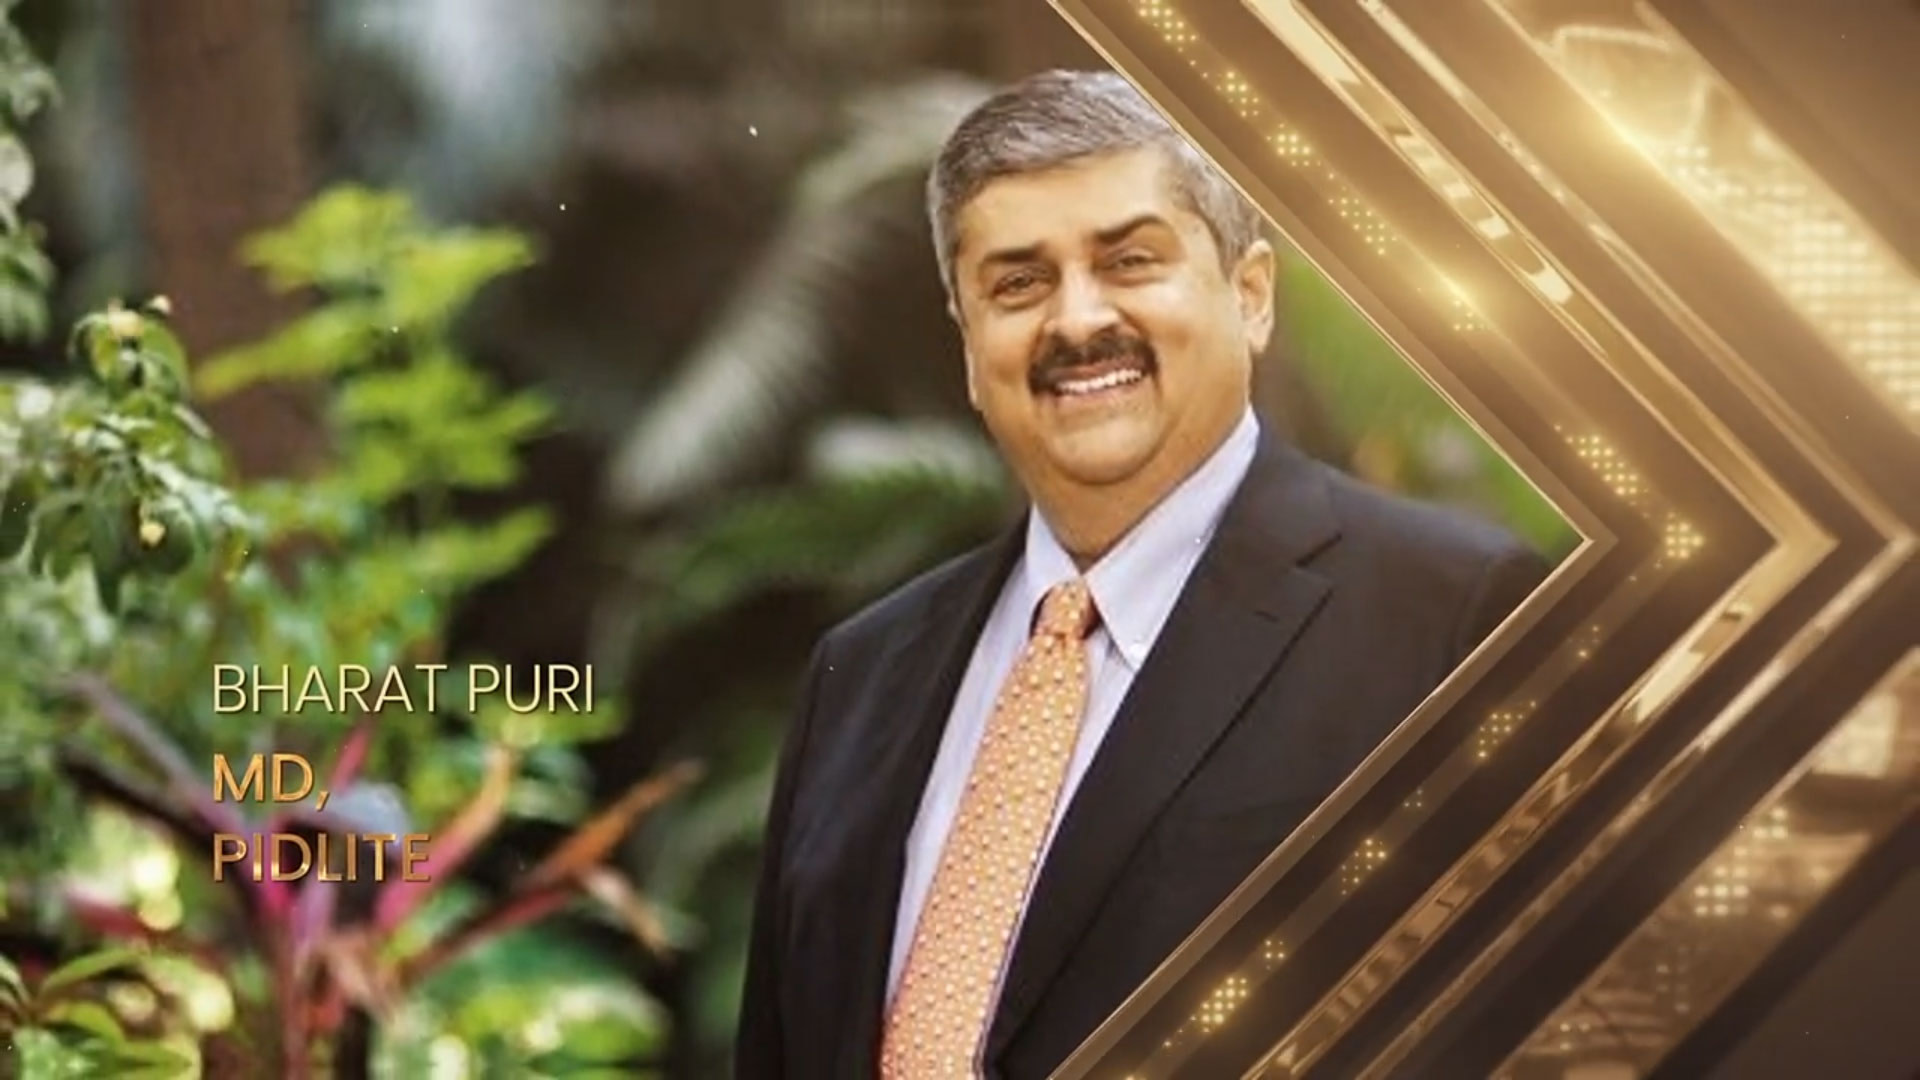 Recognizing a pioneer of east-meets-west pro-neurial culture, Mr. Bharat Puri